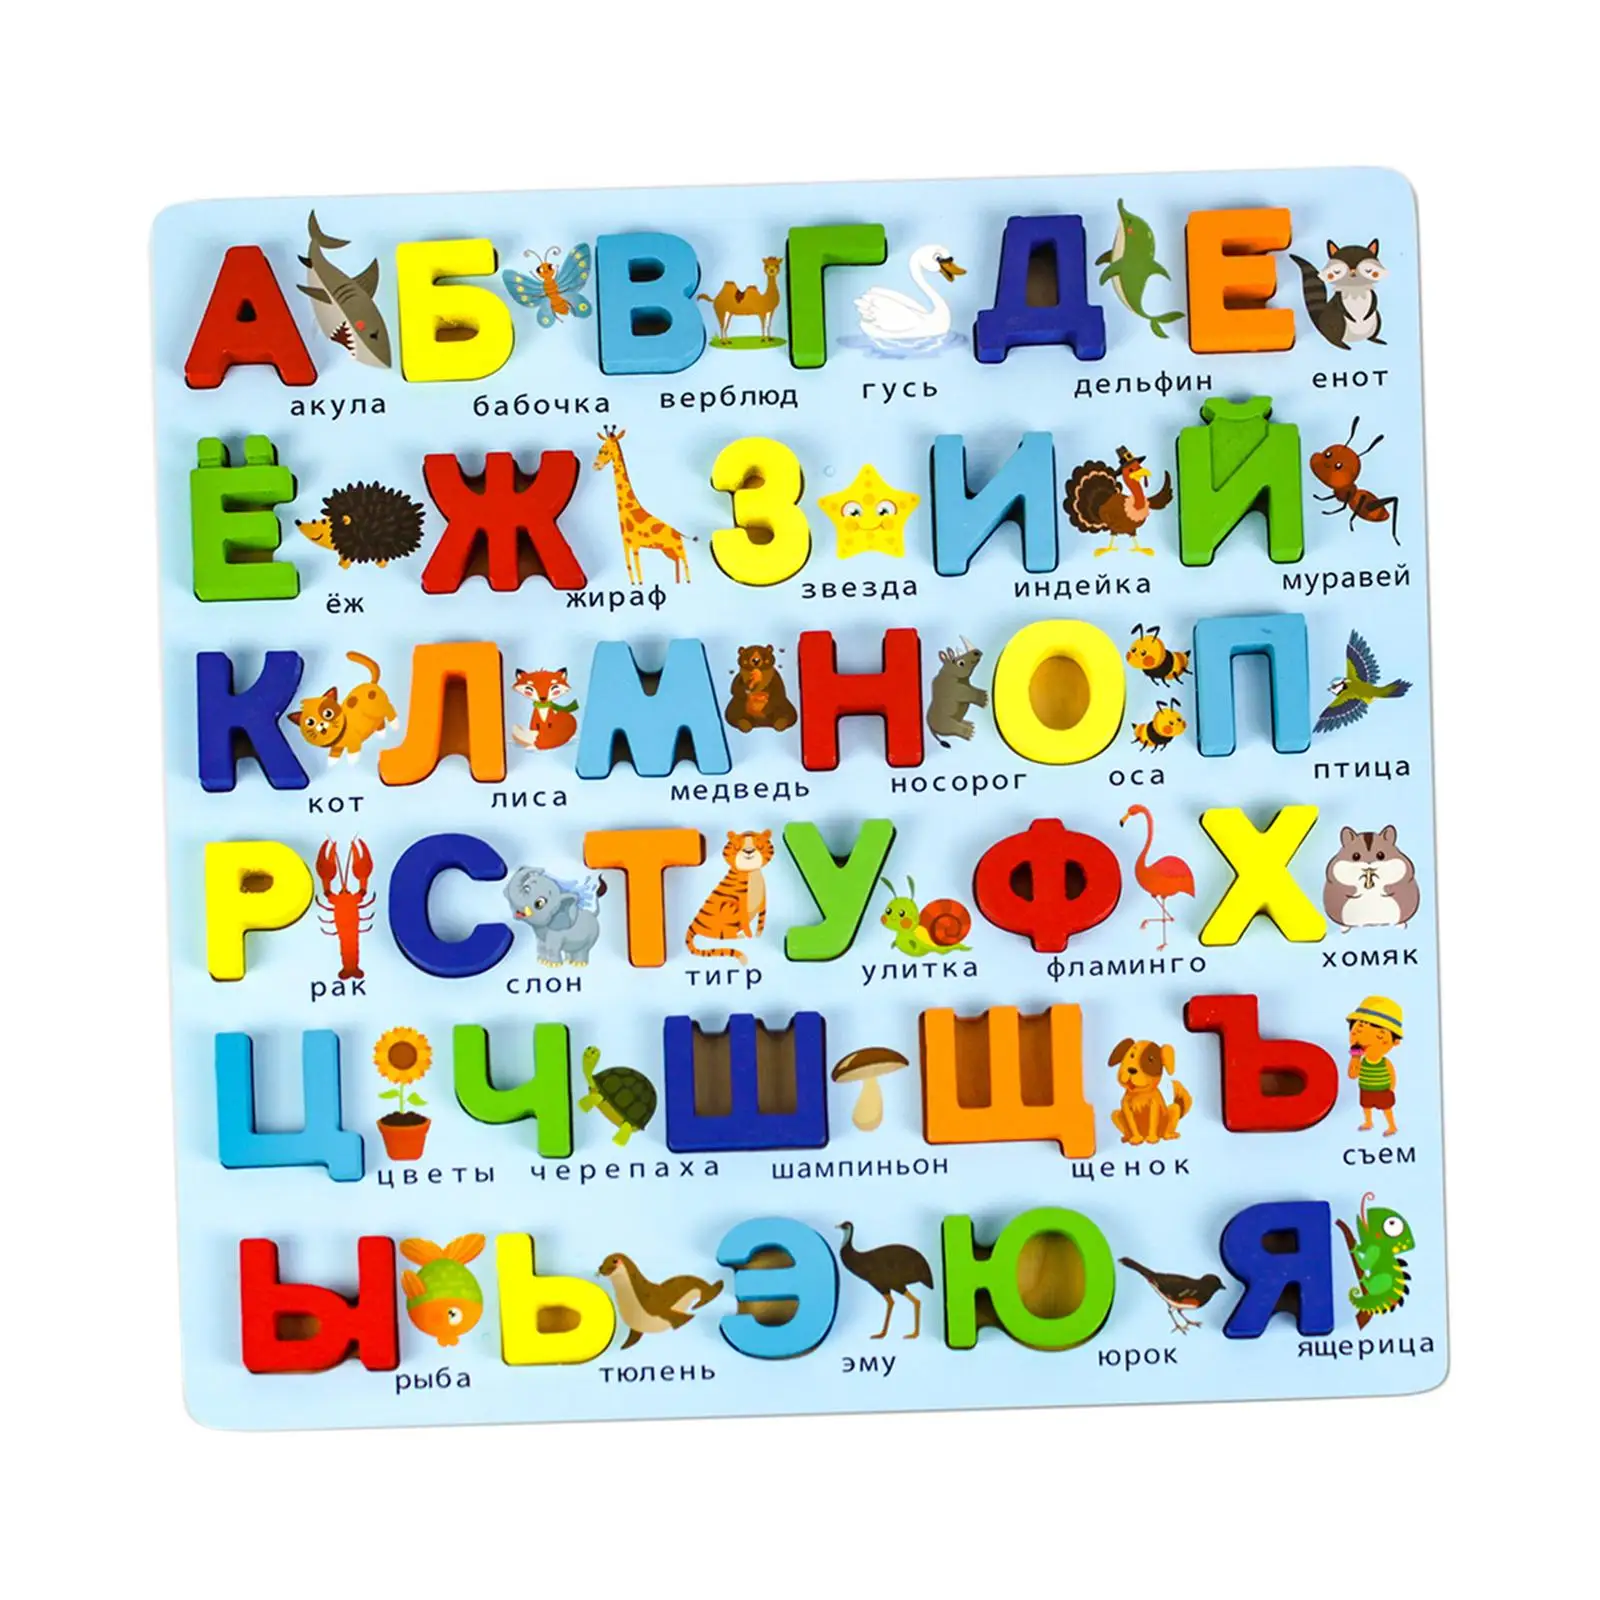 Wooden Puzzles Set Russian Alphabet Teaching Aids Preschool Learning Educational Educational Toys Learning Puzzles Board for Kid